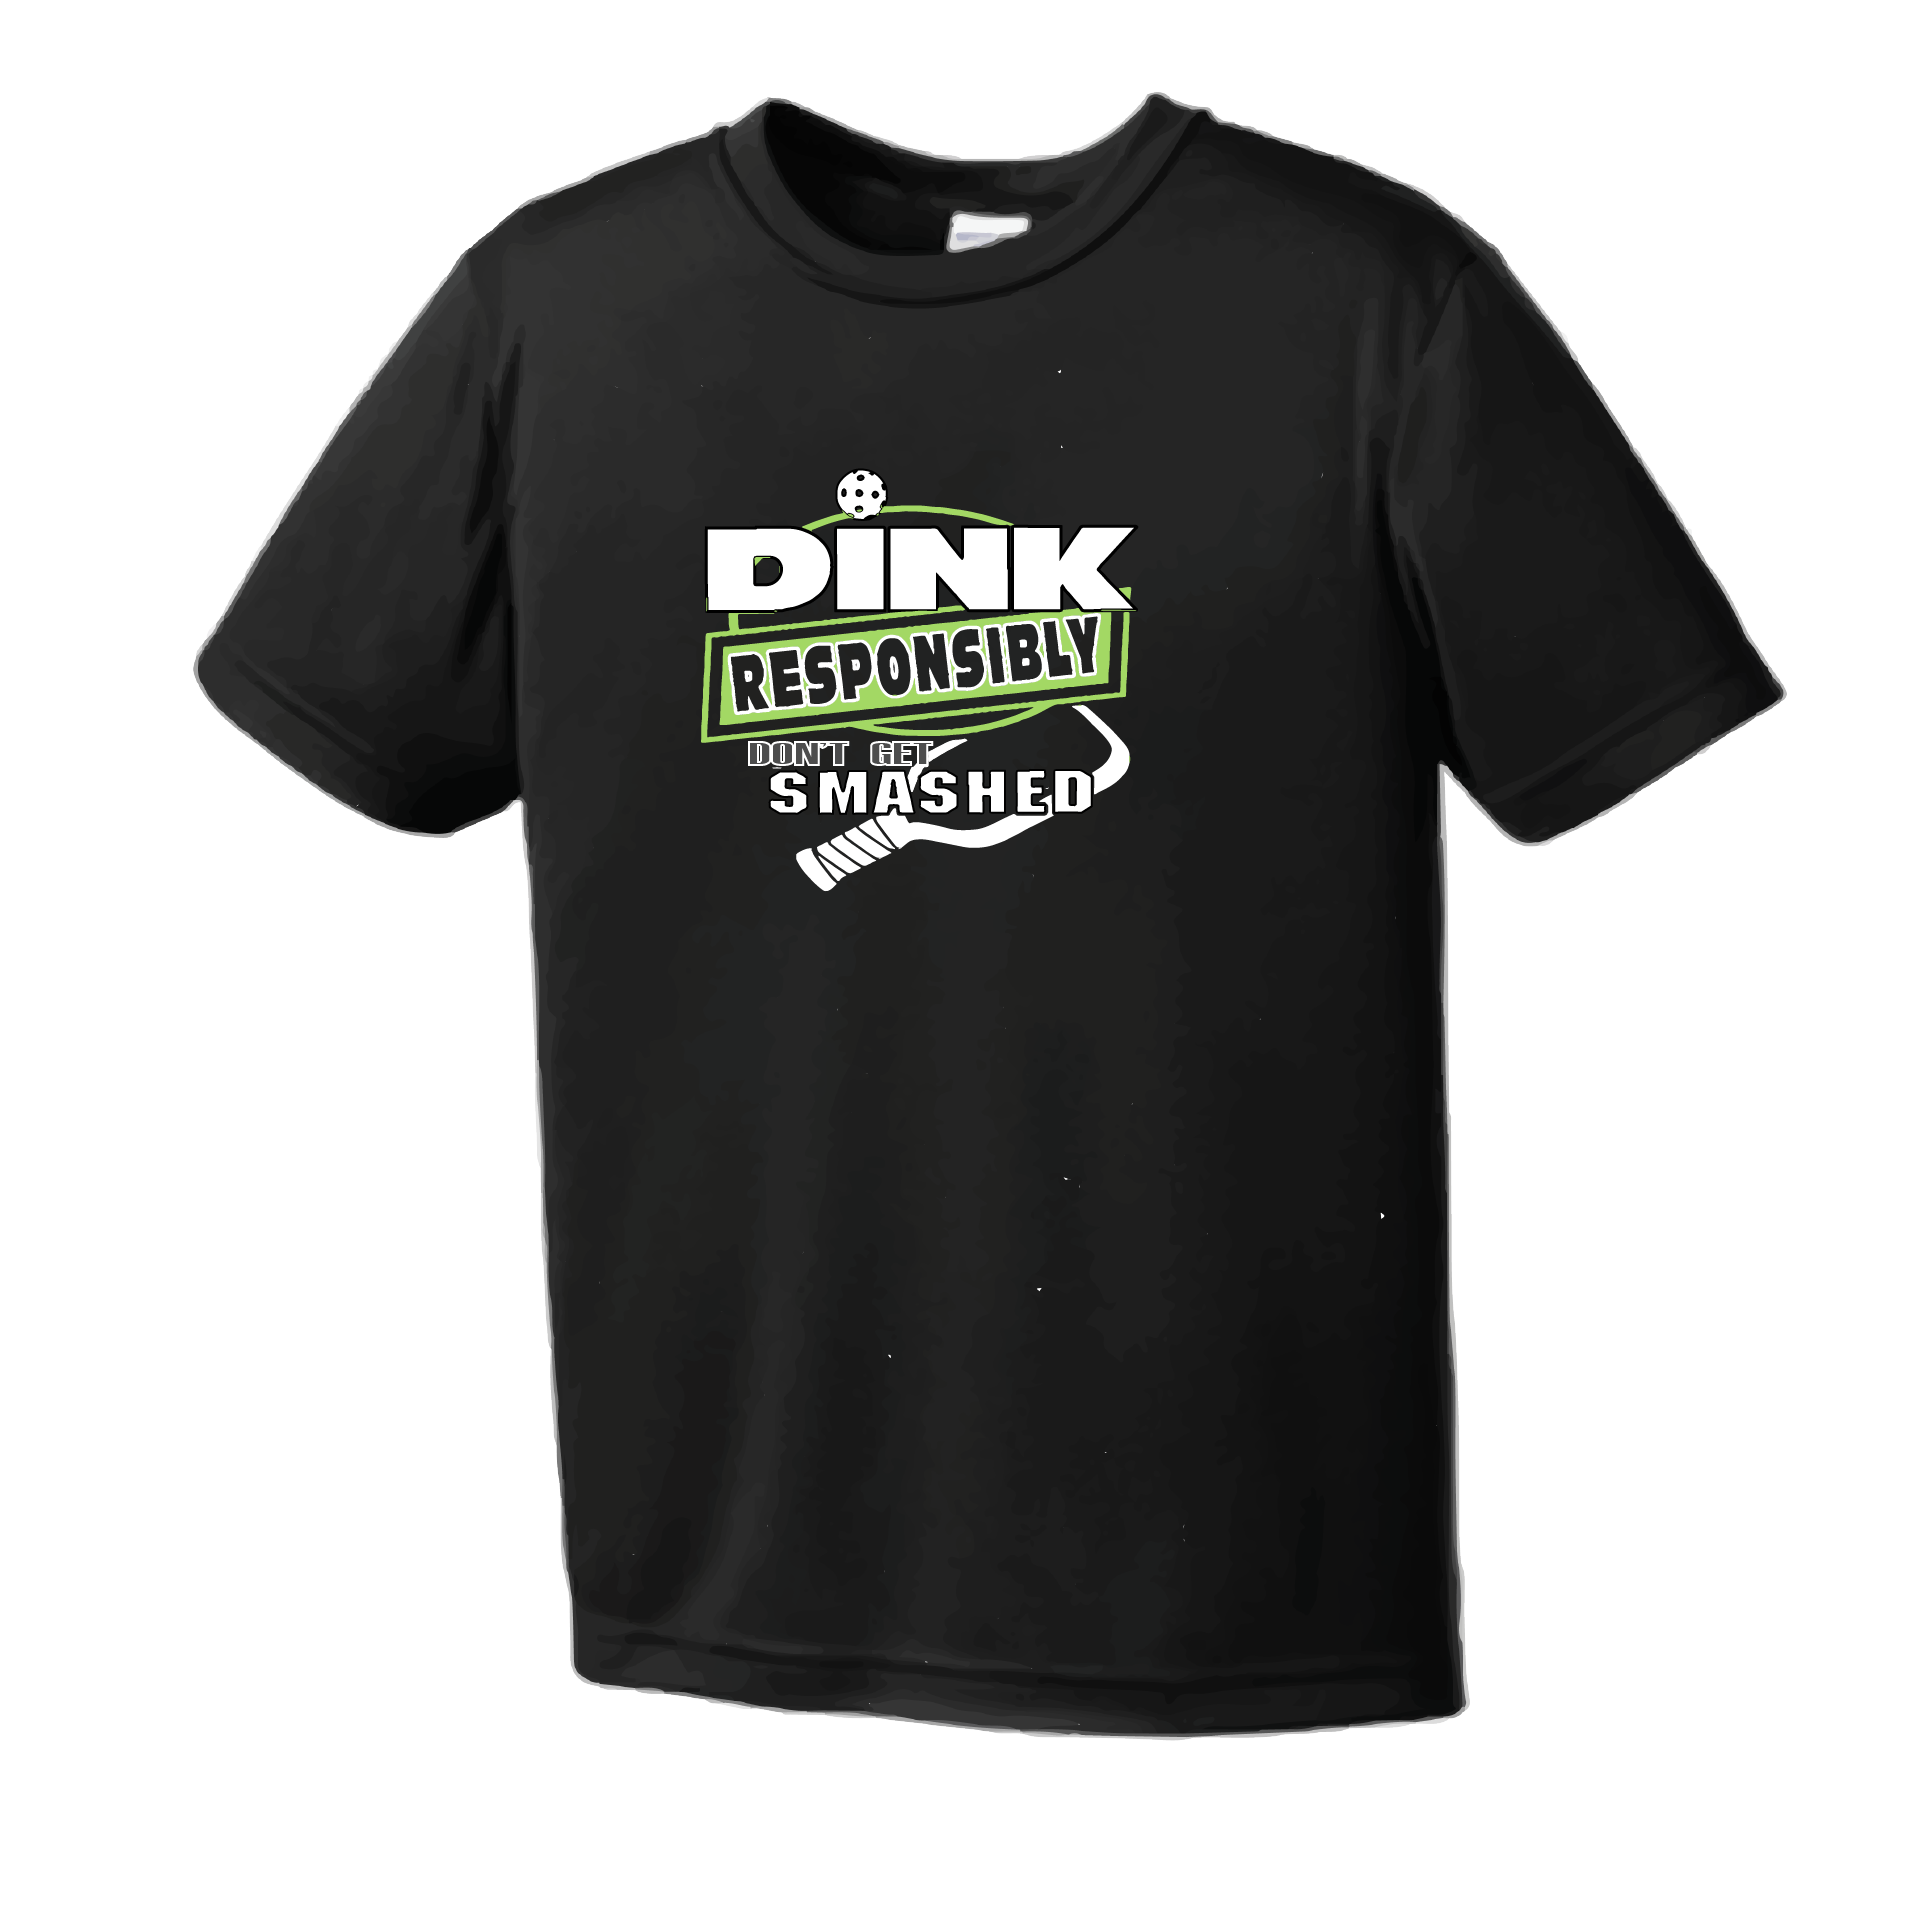 Pickleball Design: Dink Responsibly - Don't Get Smashed  Men's Style: Short Sleeved   Shirts are lightweight, roomy and highly breathable. These moisture-wicking shirts are designed for athletic performance. They feature PosiCharge technology to lock in color and prevent logos from fading. Removable tag and set-in sleeves for comfort.